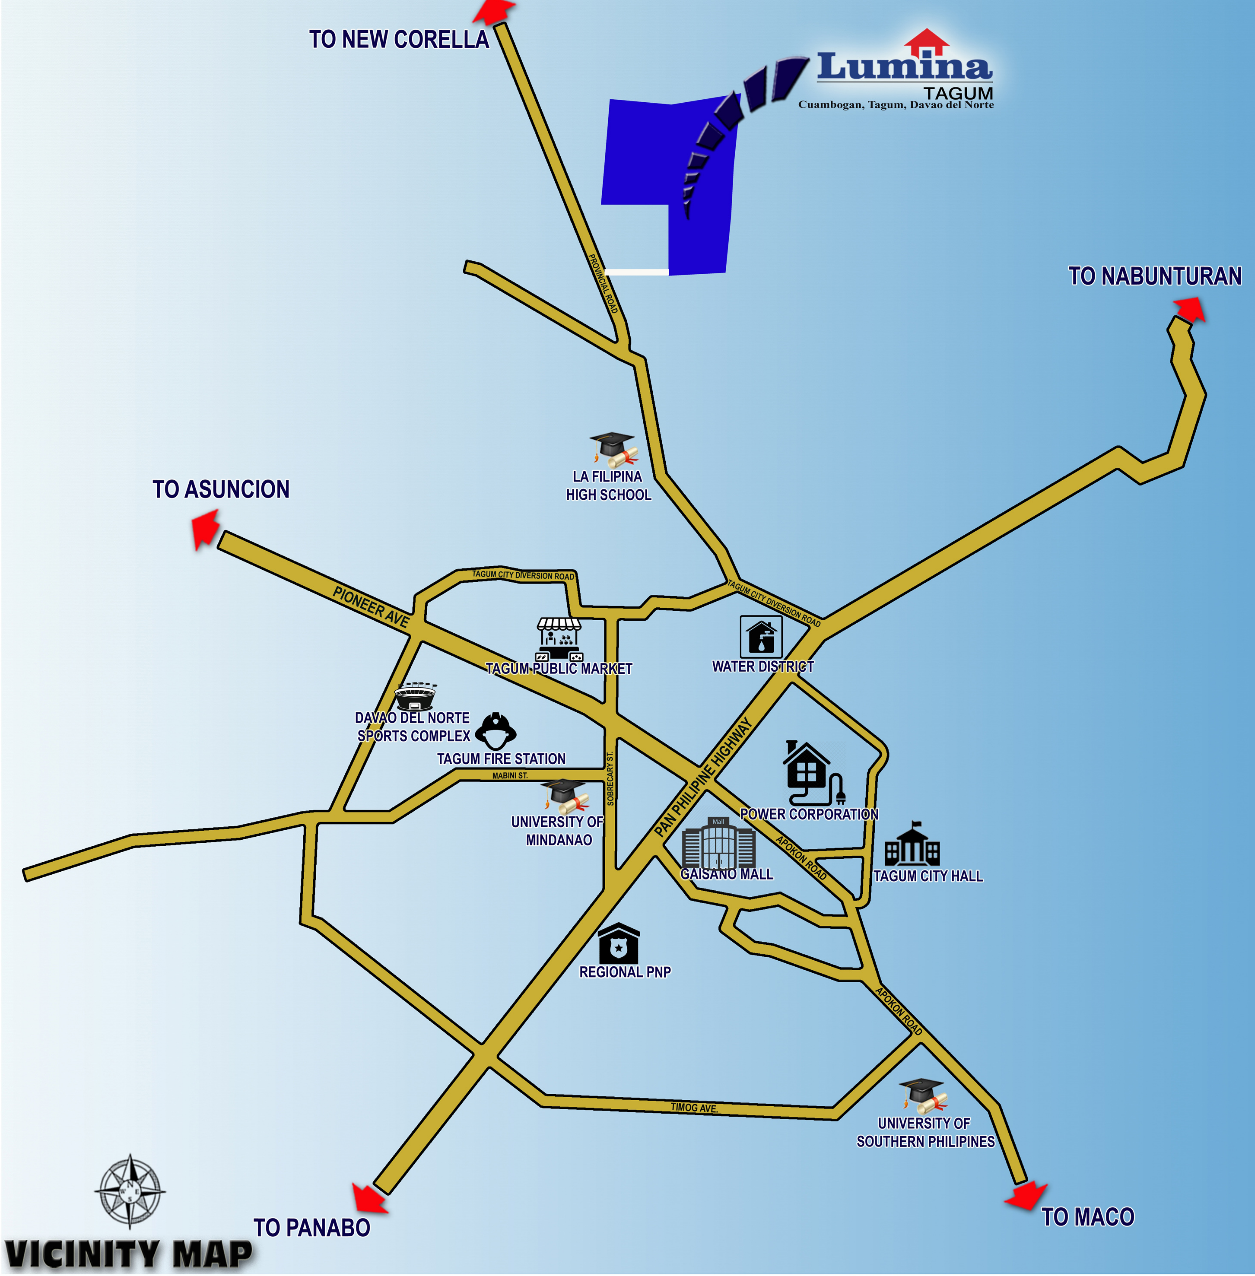 VICINITY-MAP-1642501481.png